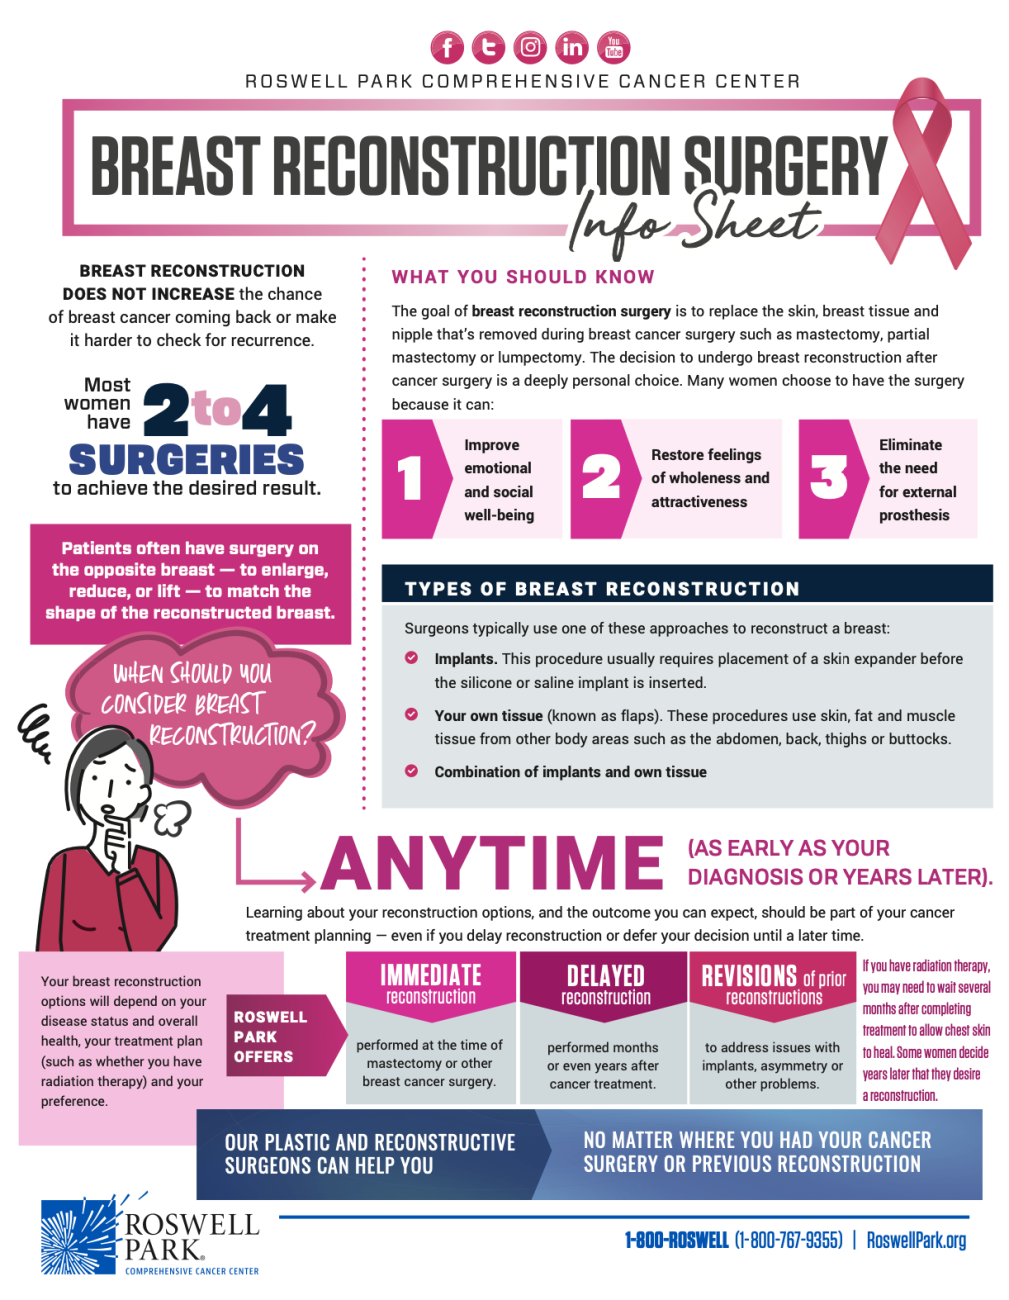 Is Breast Cancer Reconstruction Covered by Insurance or Medicaid